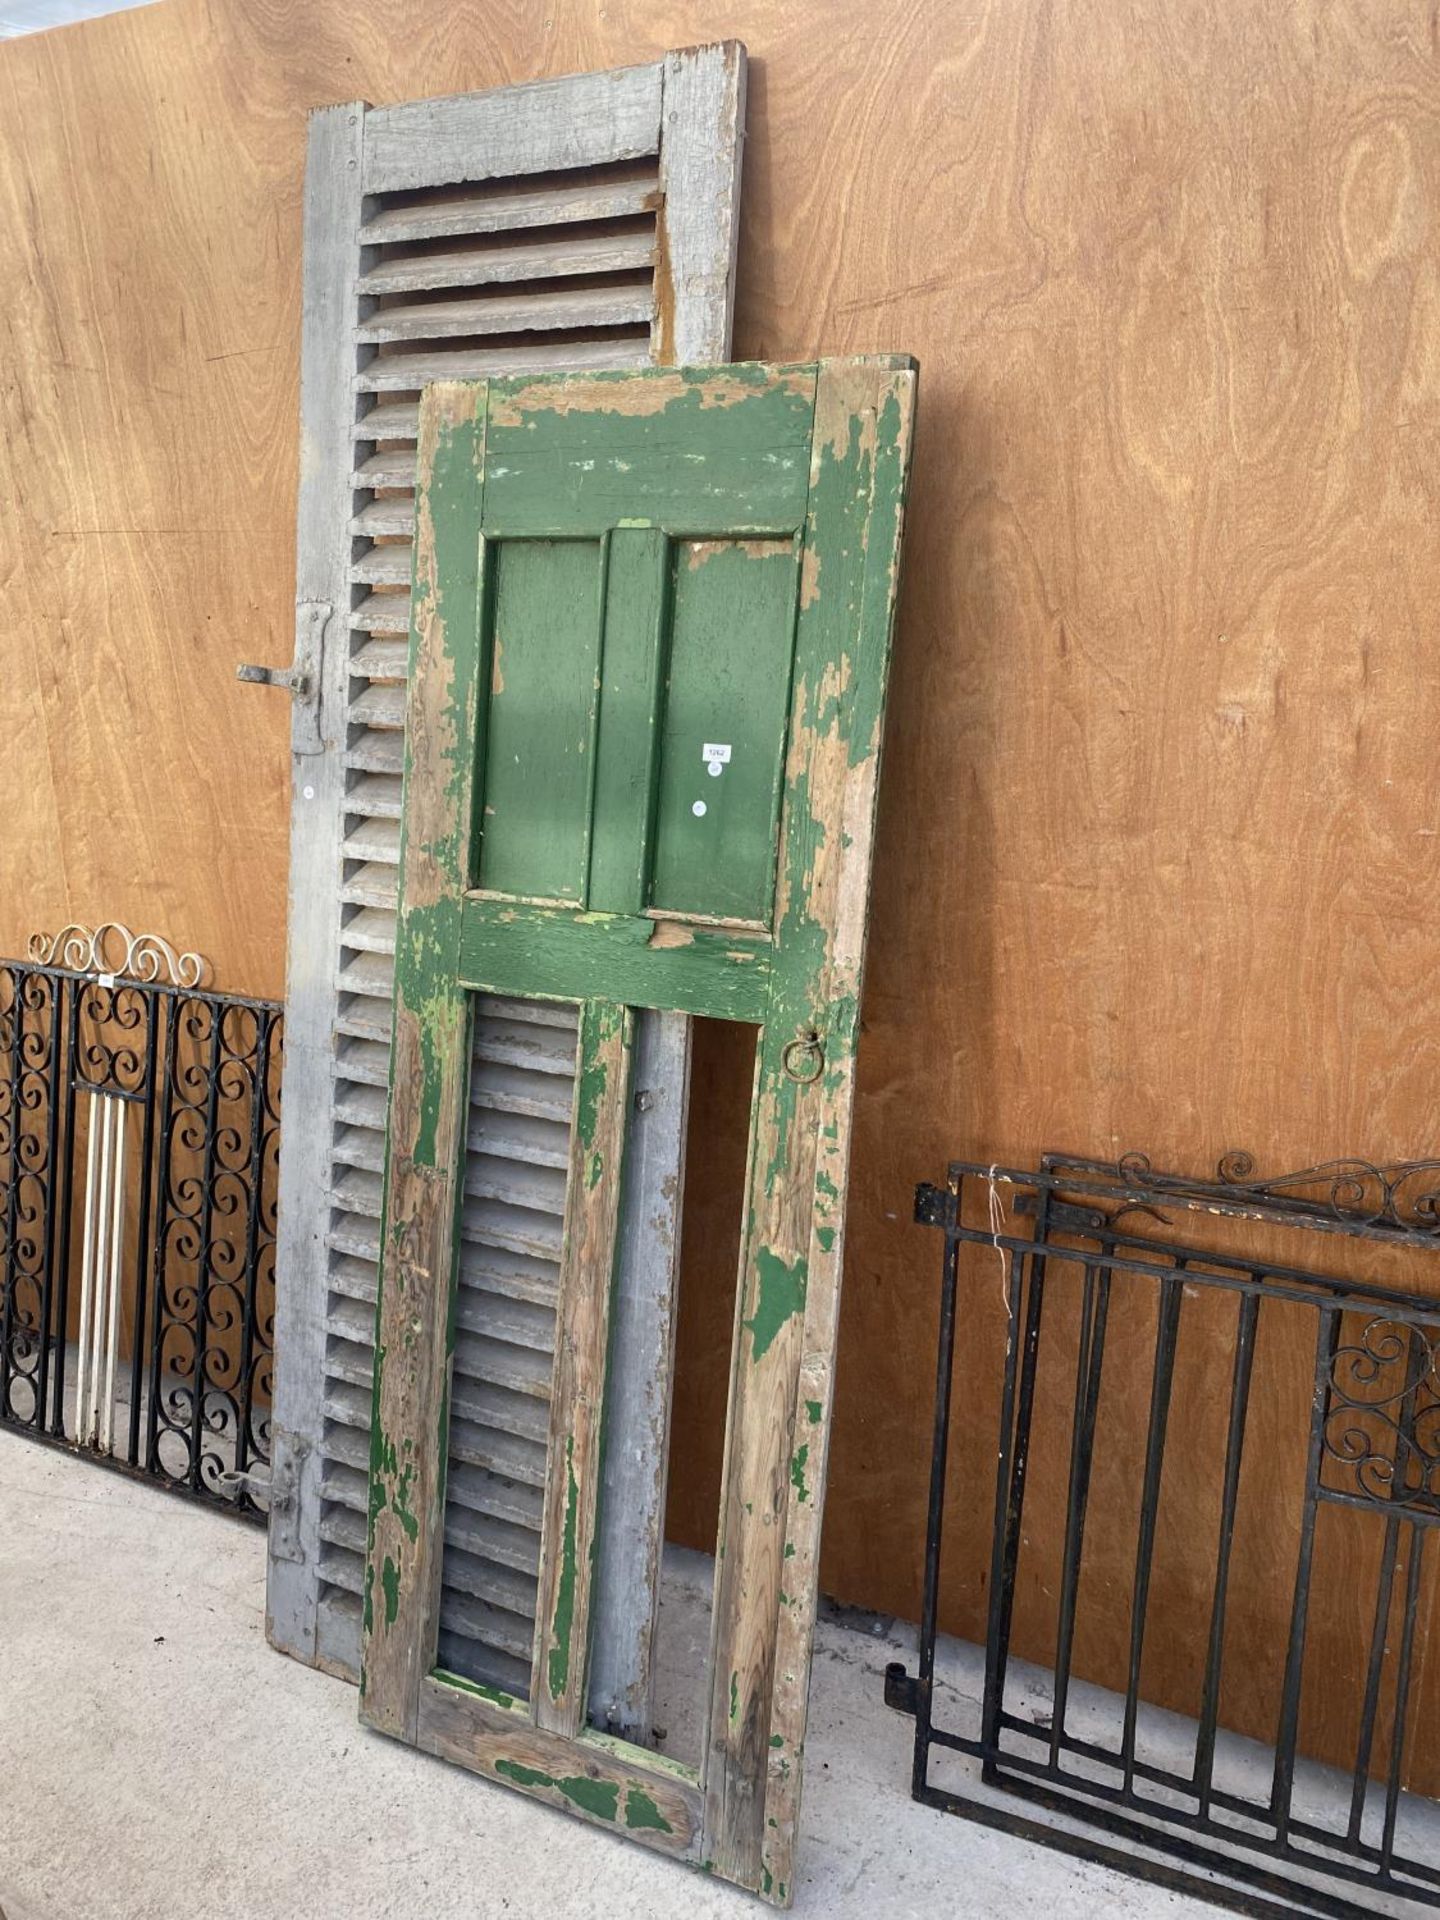 A VINTAGE WOODEN FRENCH WINDOW SHUTTER AND A VINTAGE WOODEN HUNGARIAN DOOR